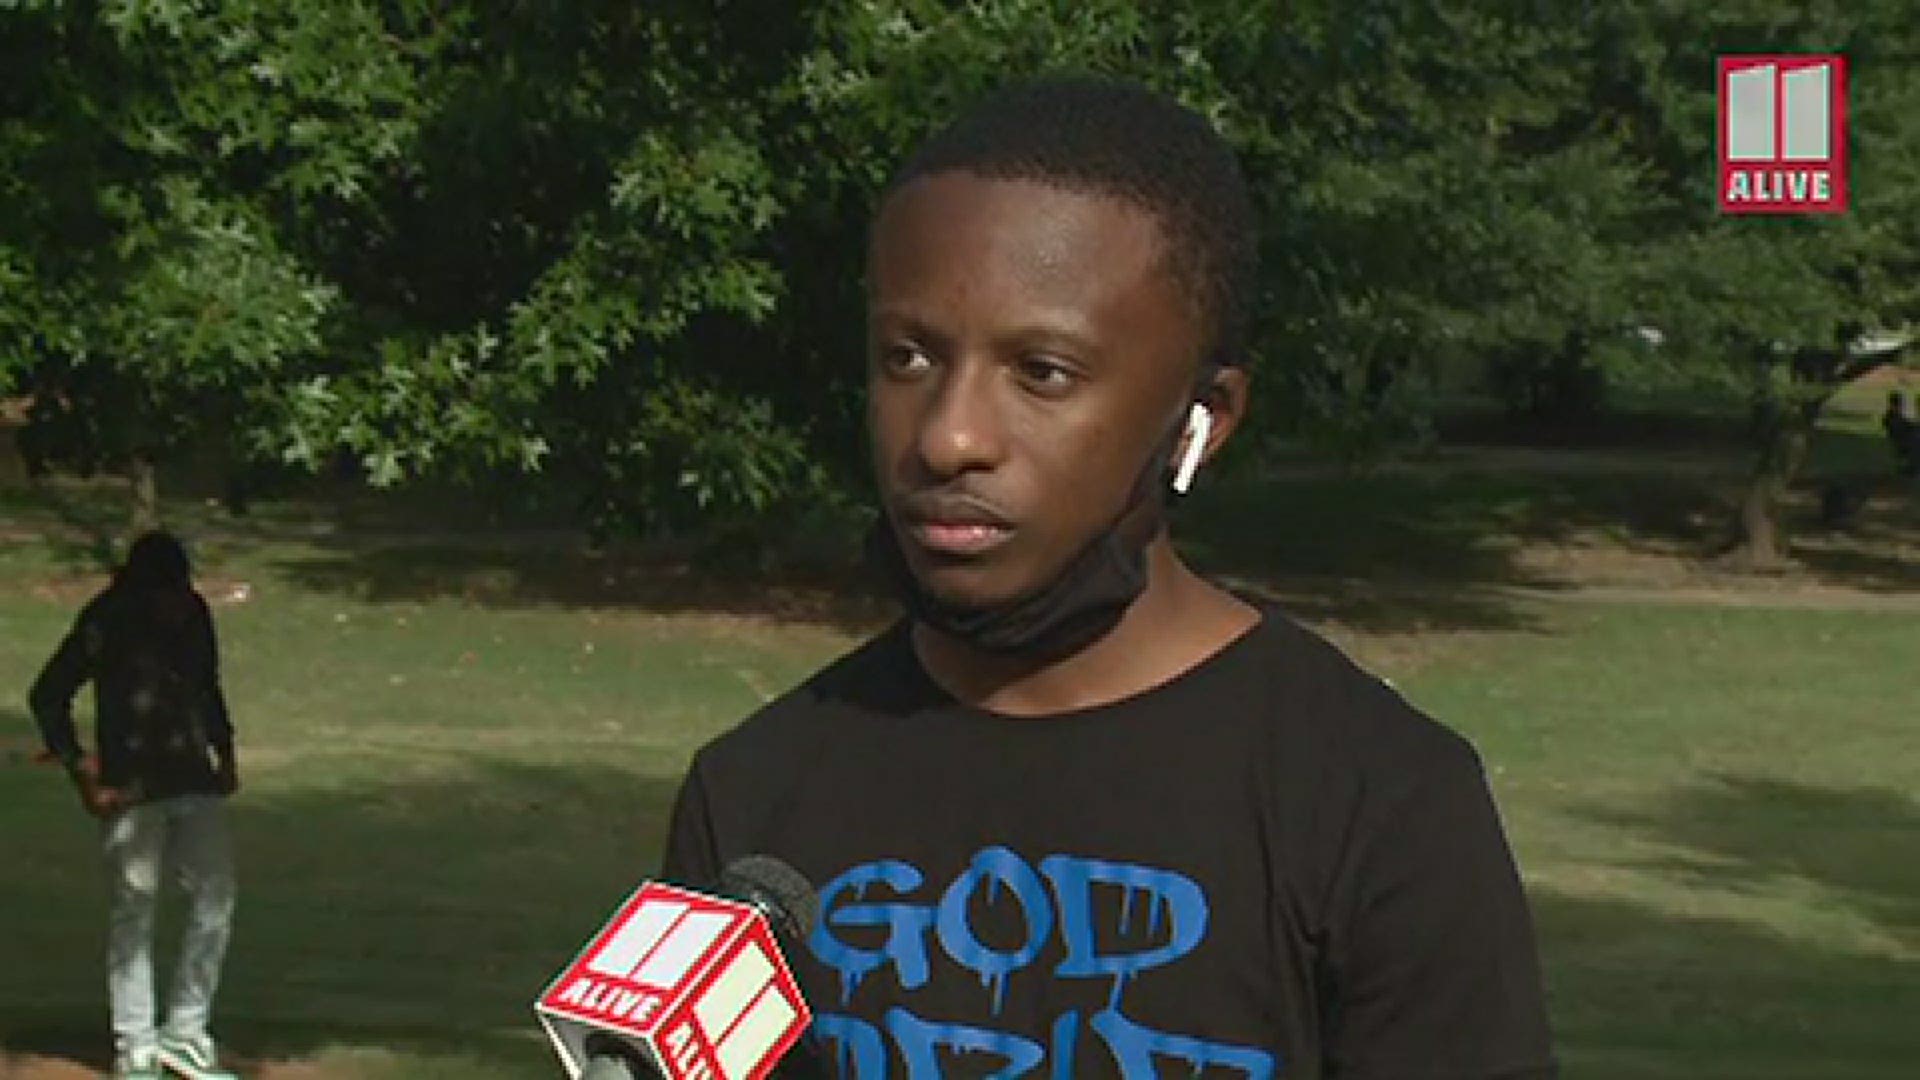 Pastor Jared Sawyer Jr. spoke to 11Alive after the Breonna Taylor case resulted in one indictment over shots fired into her neighbors' apartment.